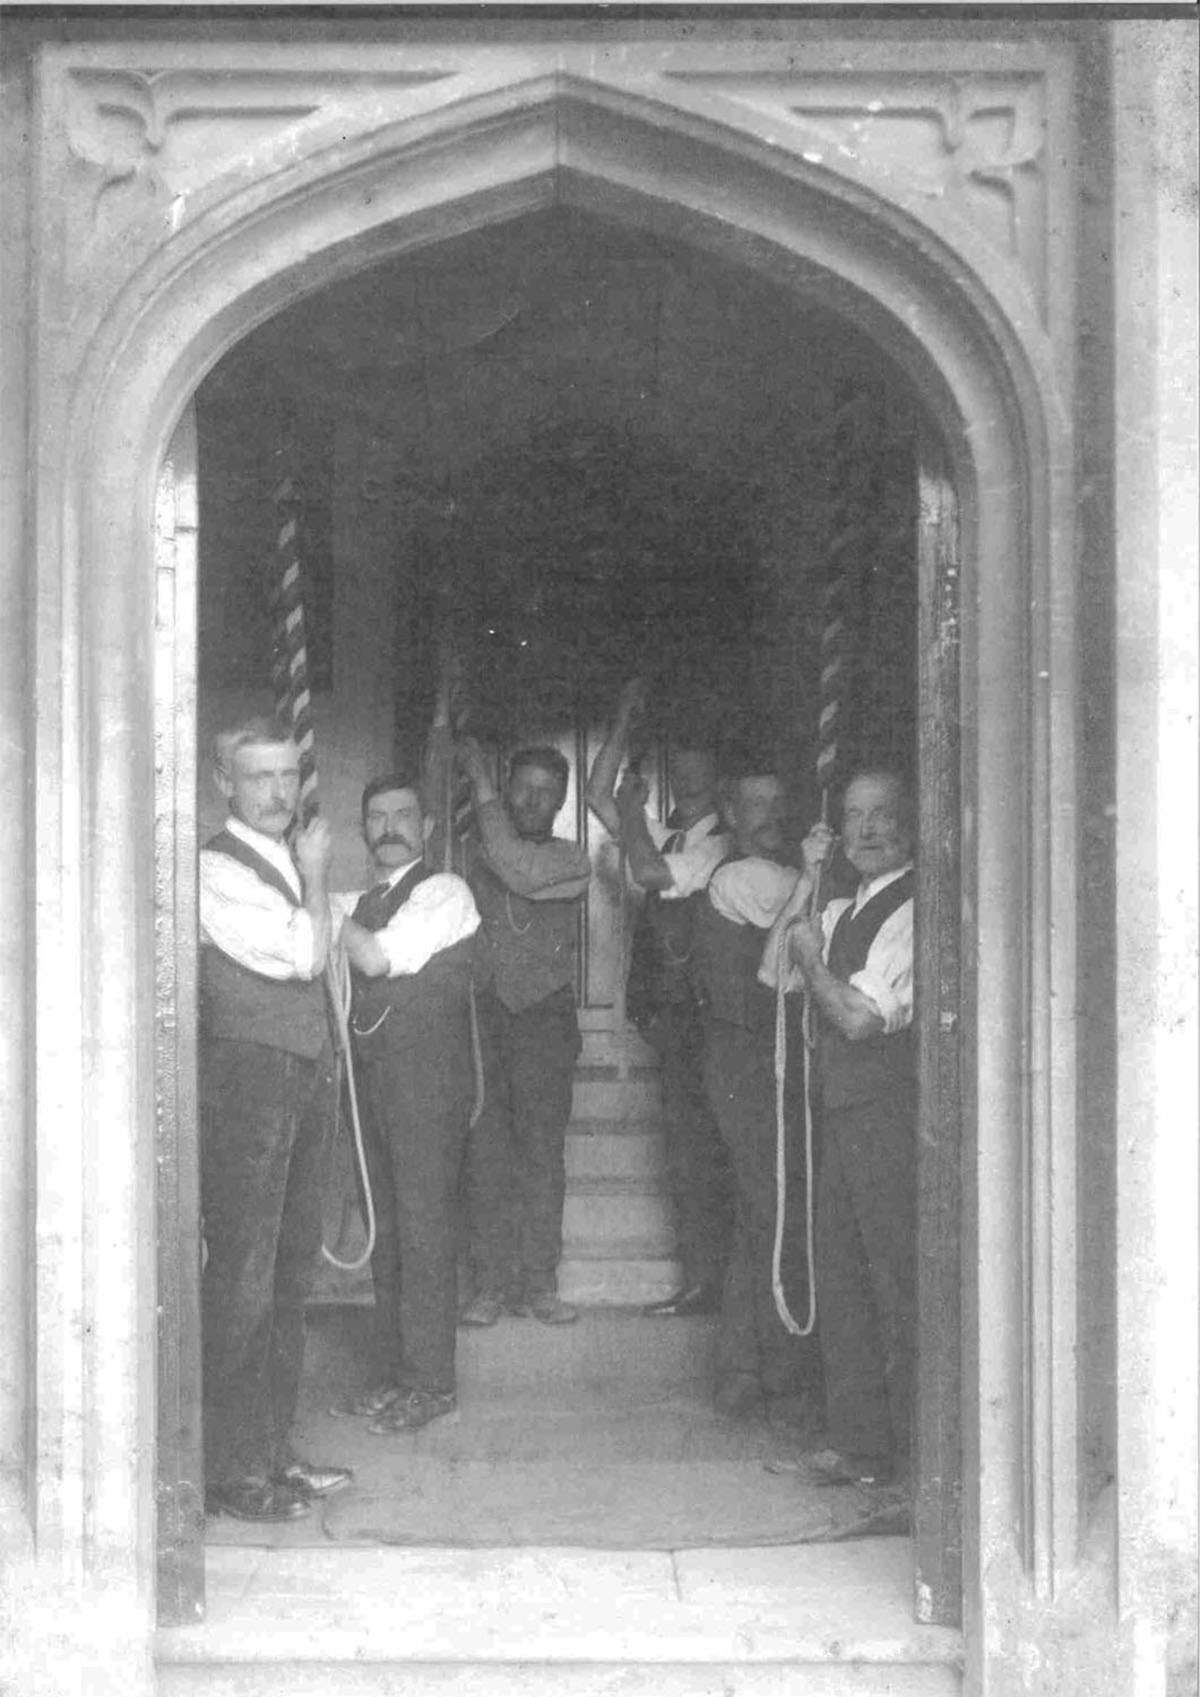 Bell ringers 1900s when there 